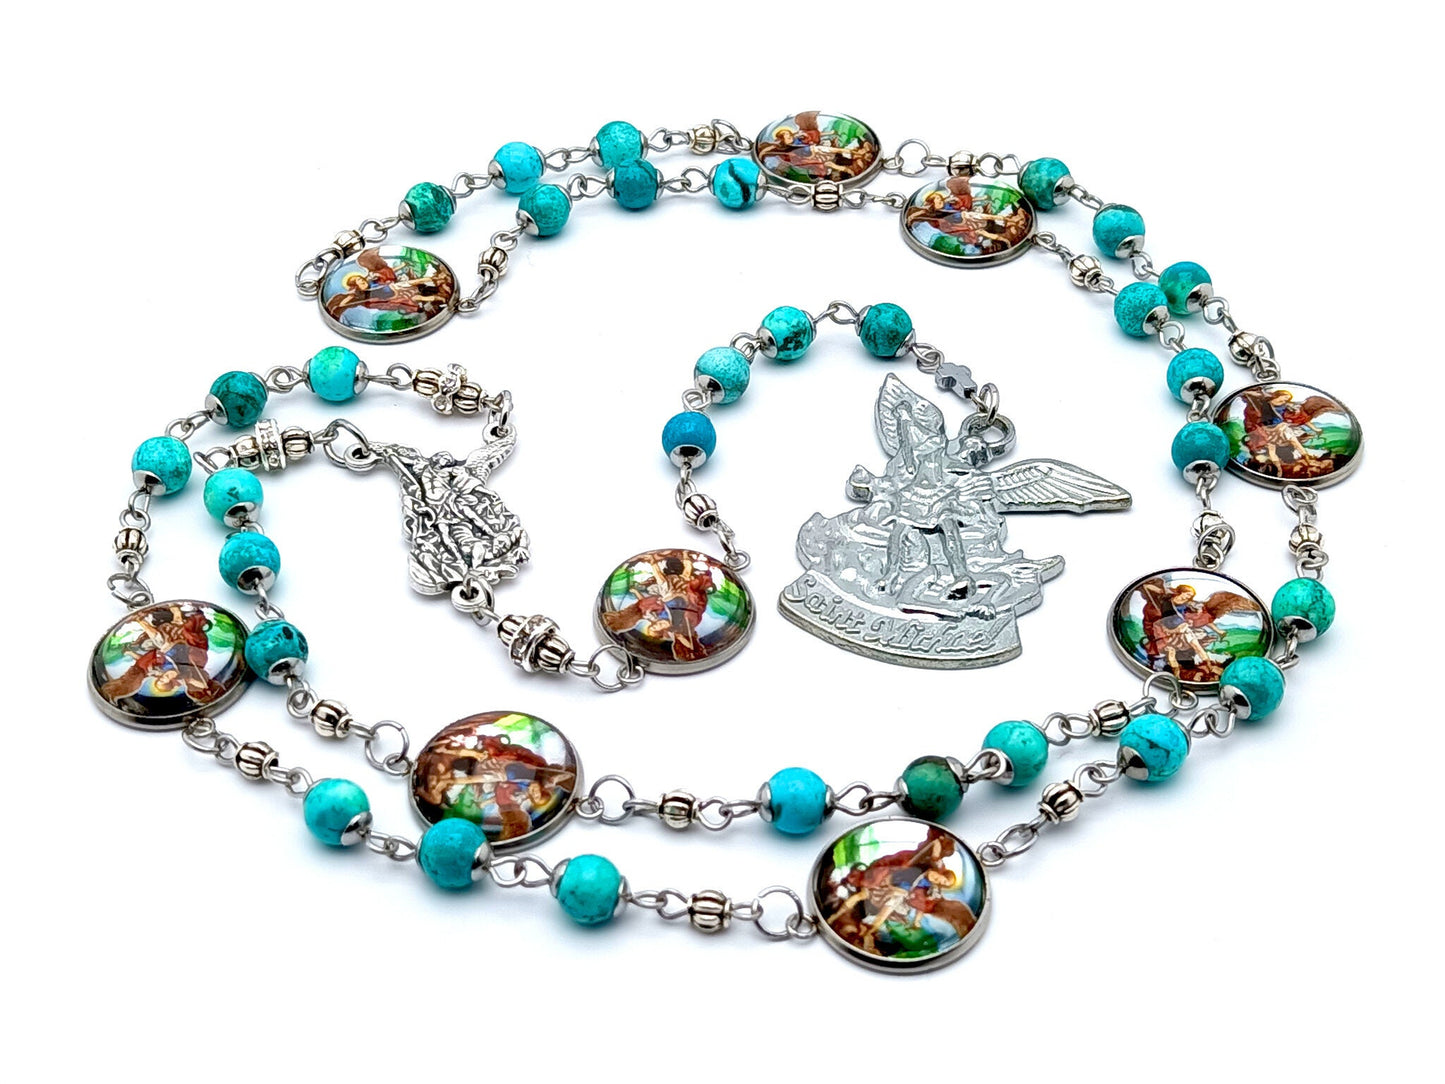 Saint Michael unique rosary beads prayer chaplet with turquoise gemstone and picture medal beads, silver centre and end medals